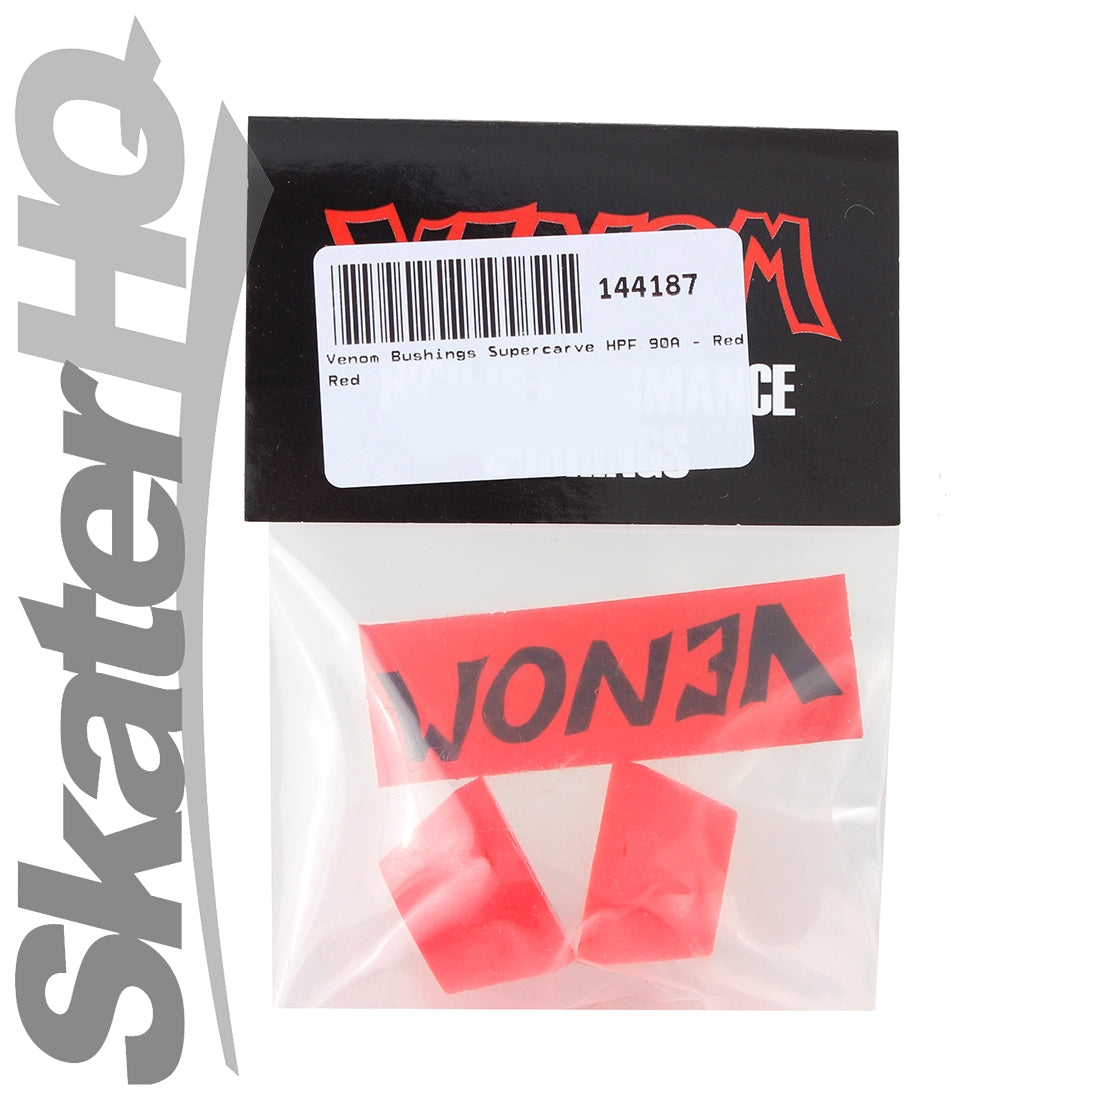 Venom Bushings Supercarve HPF 90A - Red Skateboard Hardware and Parts